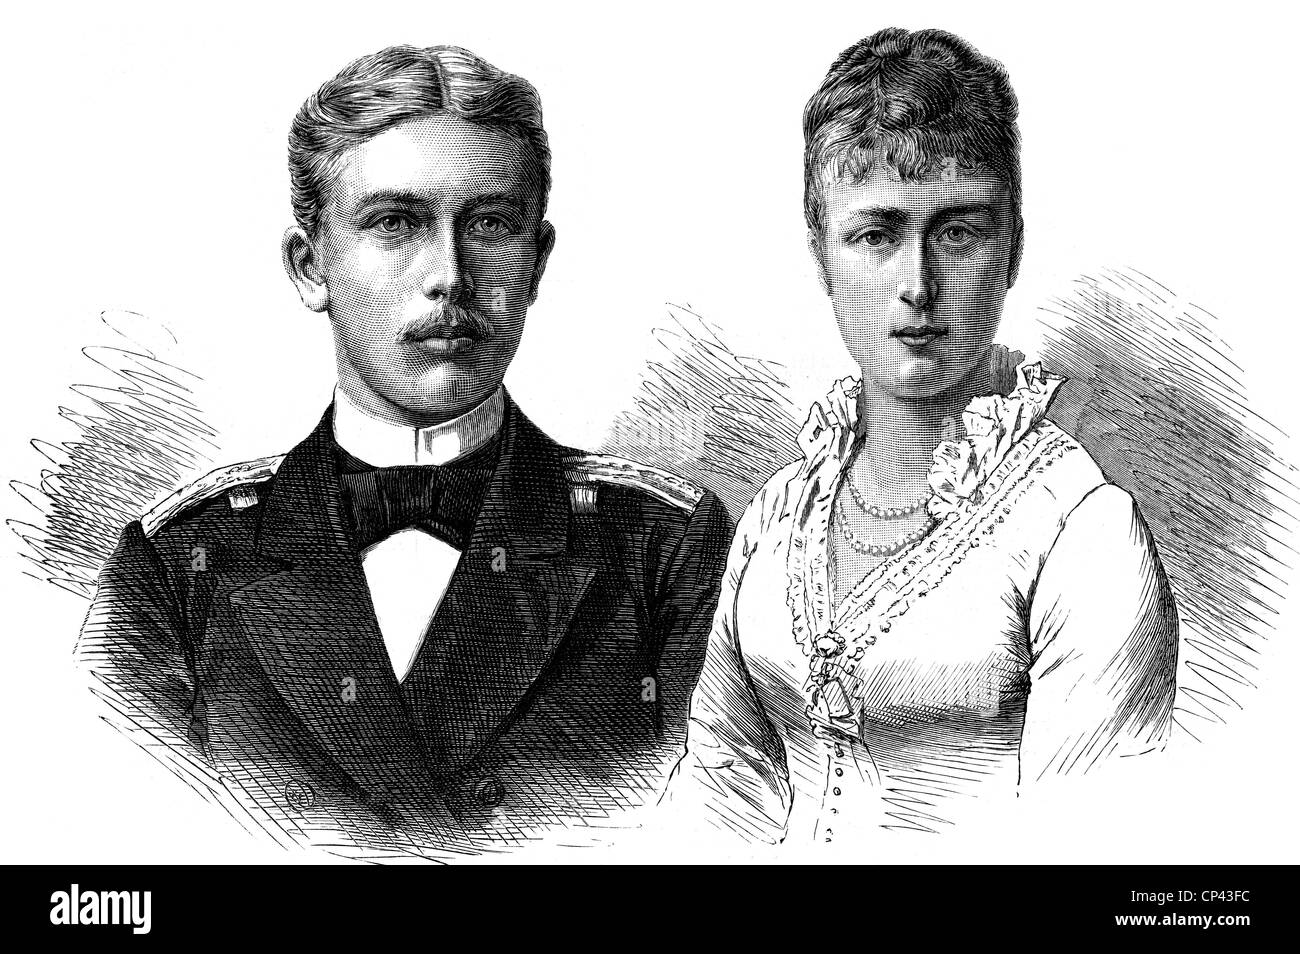 Henry, 14.8.1862 - 20.3.1929, Prince of Prussia, portrait, with his fiancee, Princess Irene of Hesse and by Rhine, wood engraving, after photographs by  Fritz Leyde & Co., Berlin, and Karl Backofen, Darmstadt, 1887/1888, Stock Photo